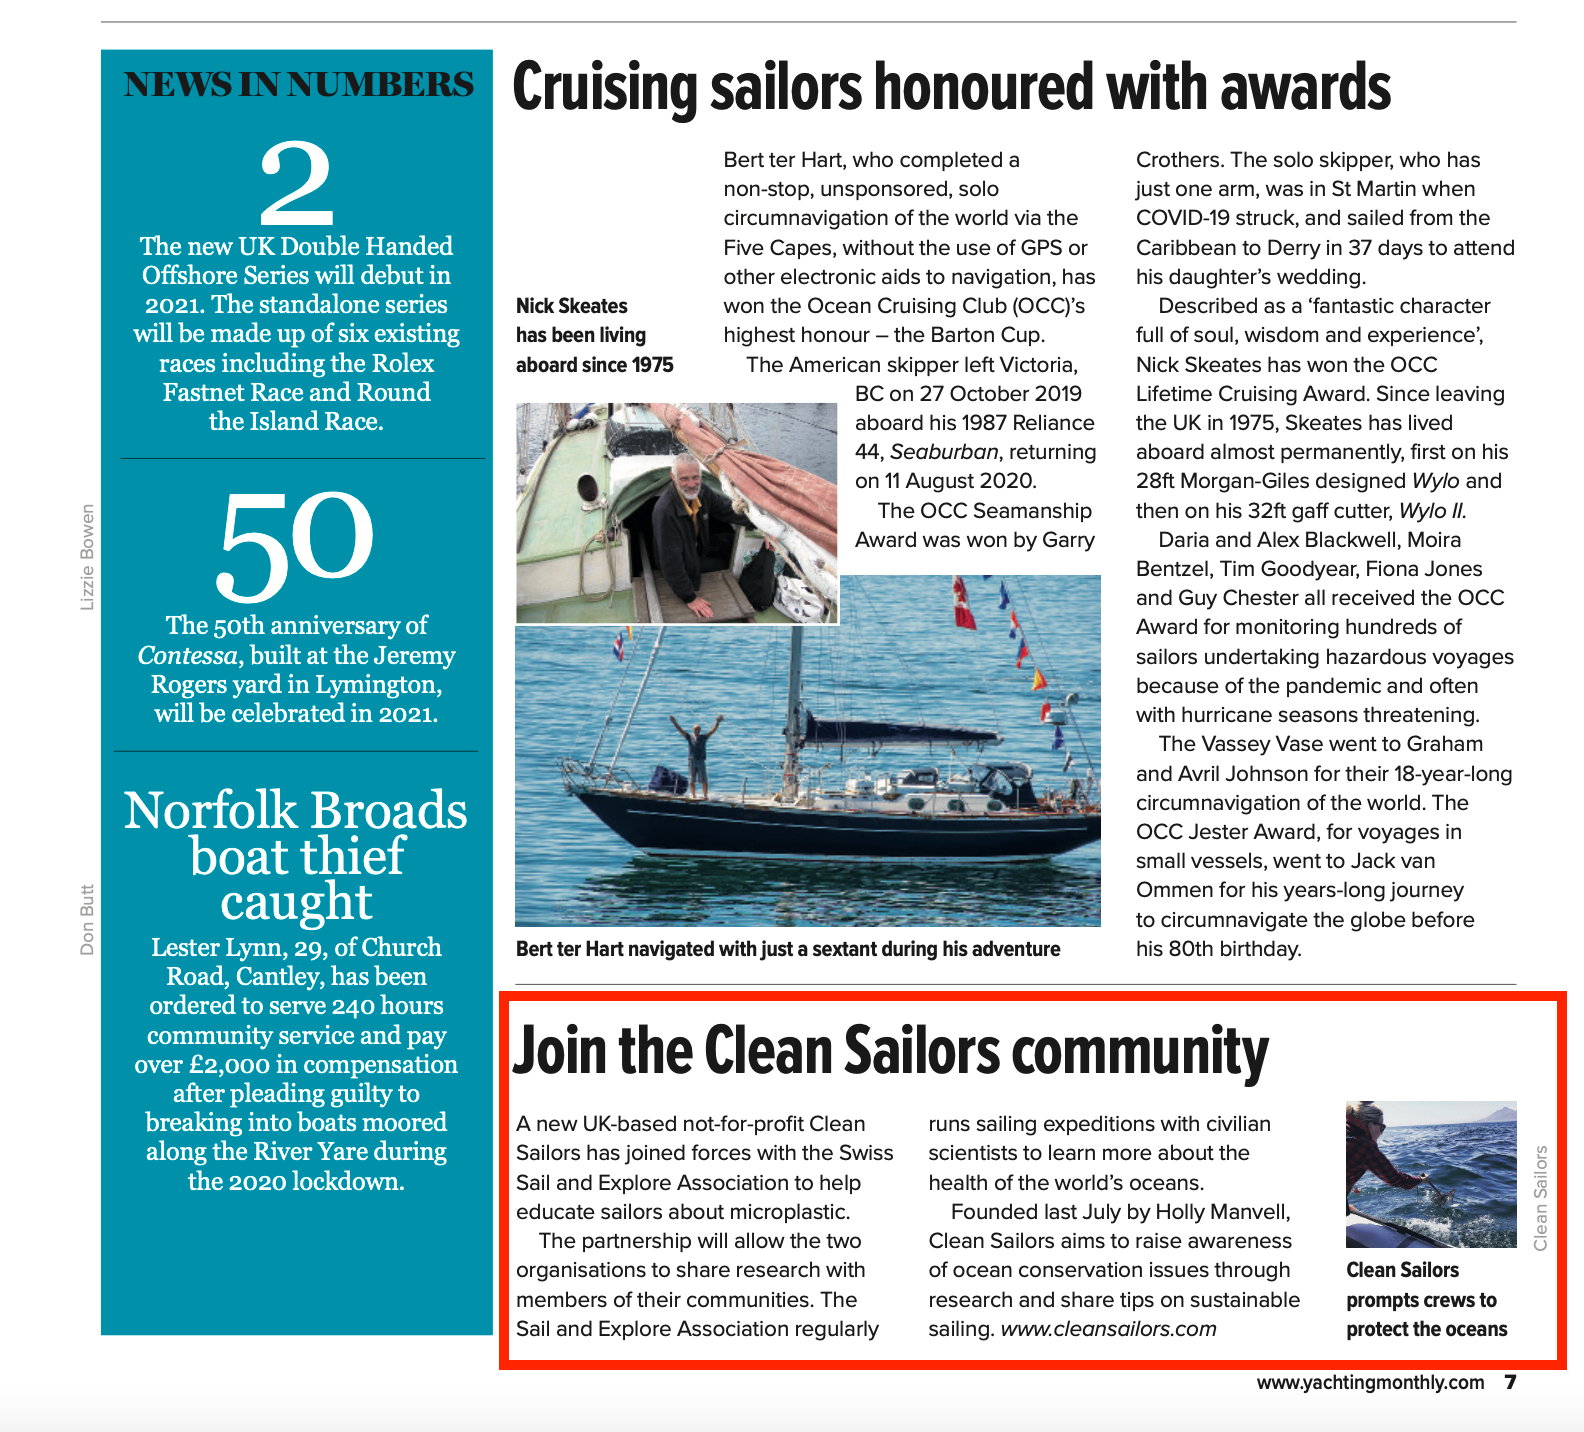 'Join the Clean Sailors community' - Yachting Monthly